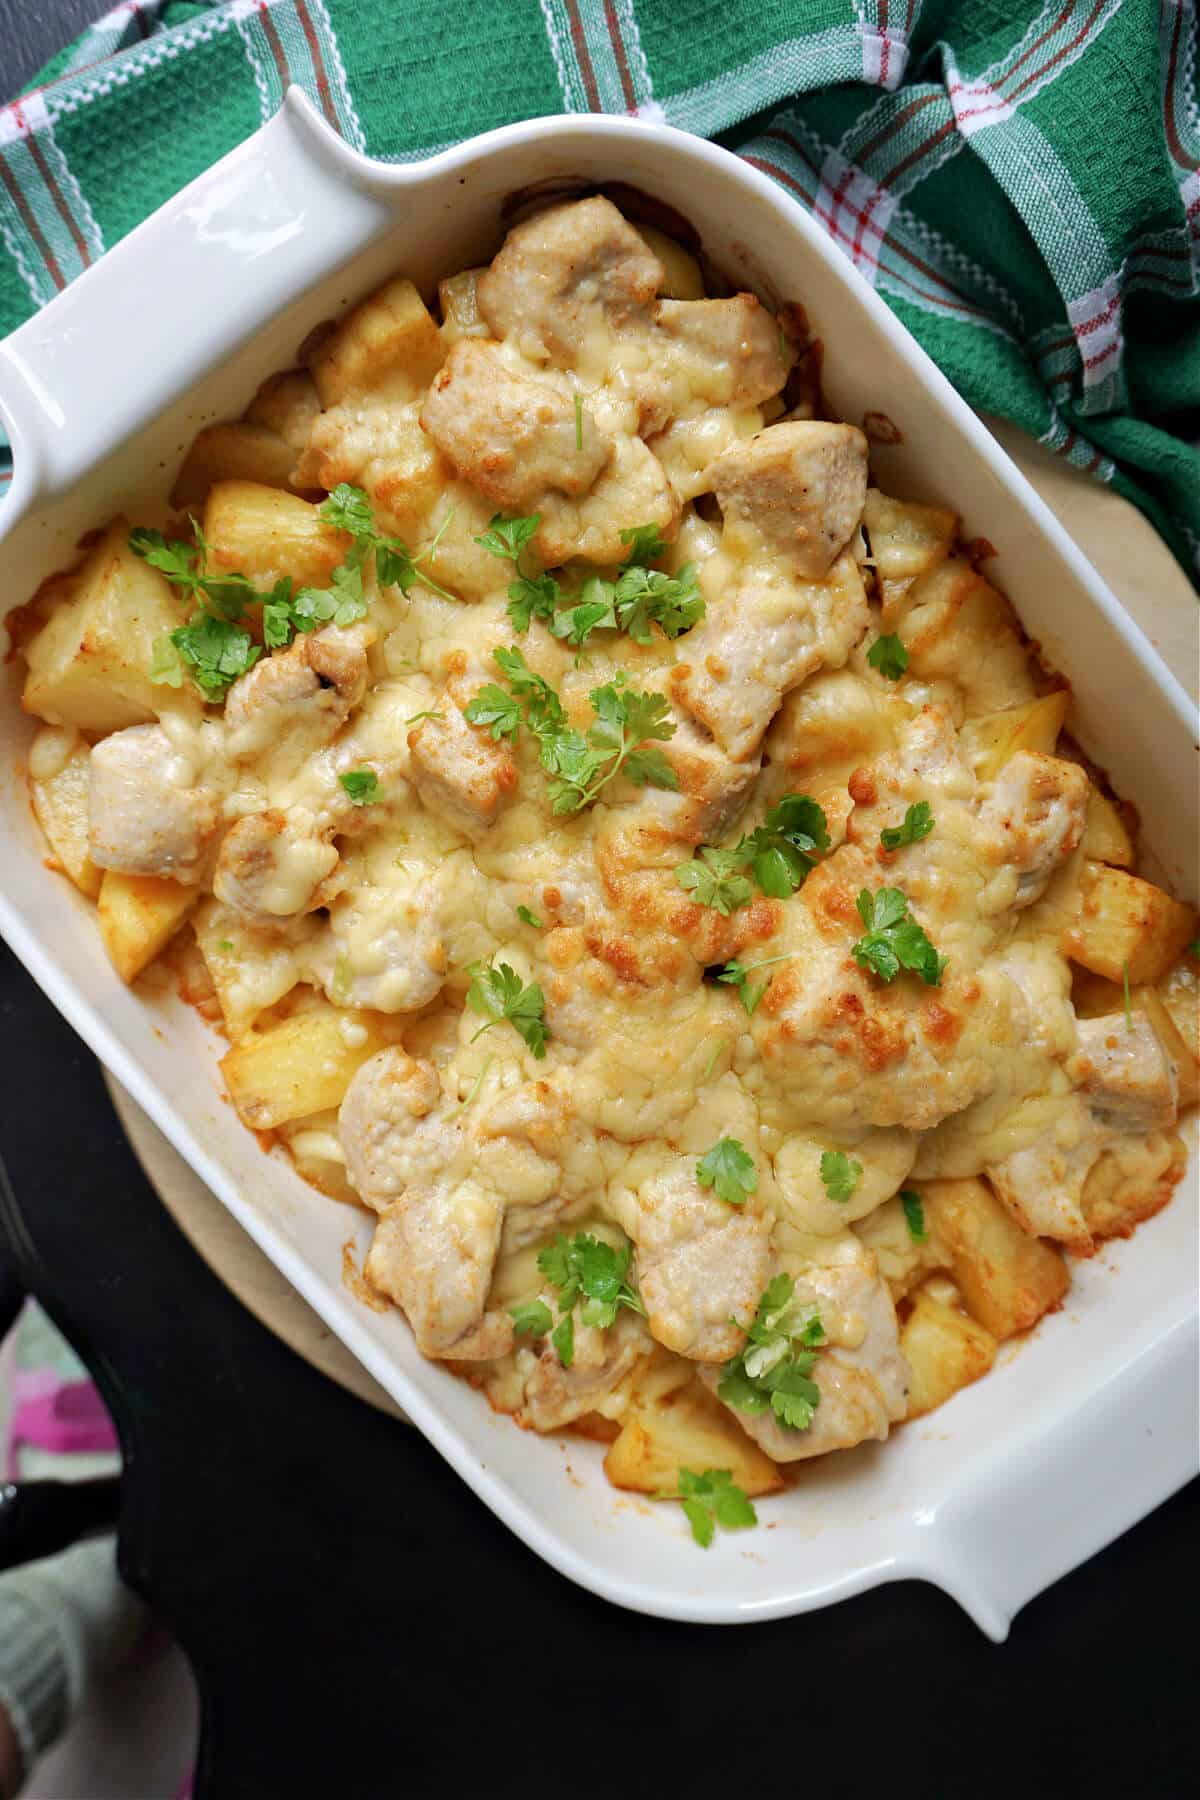 Overhead shoot of a dish with a cheesy chicken and potato bake.